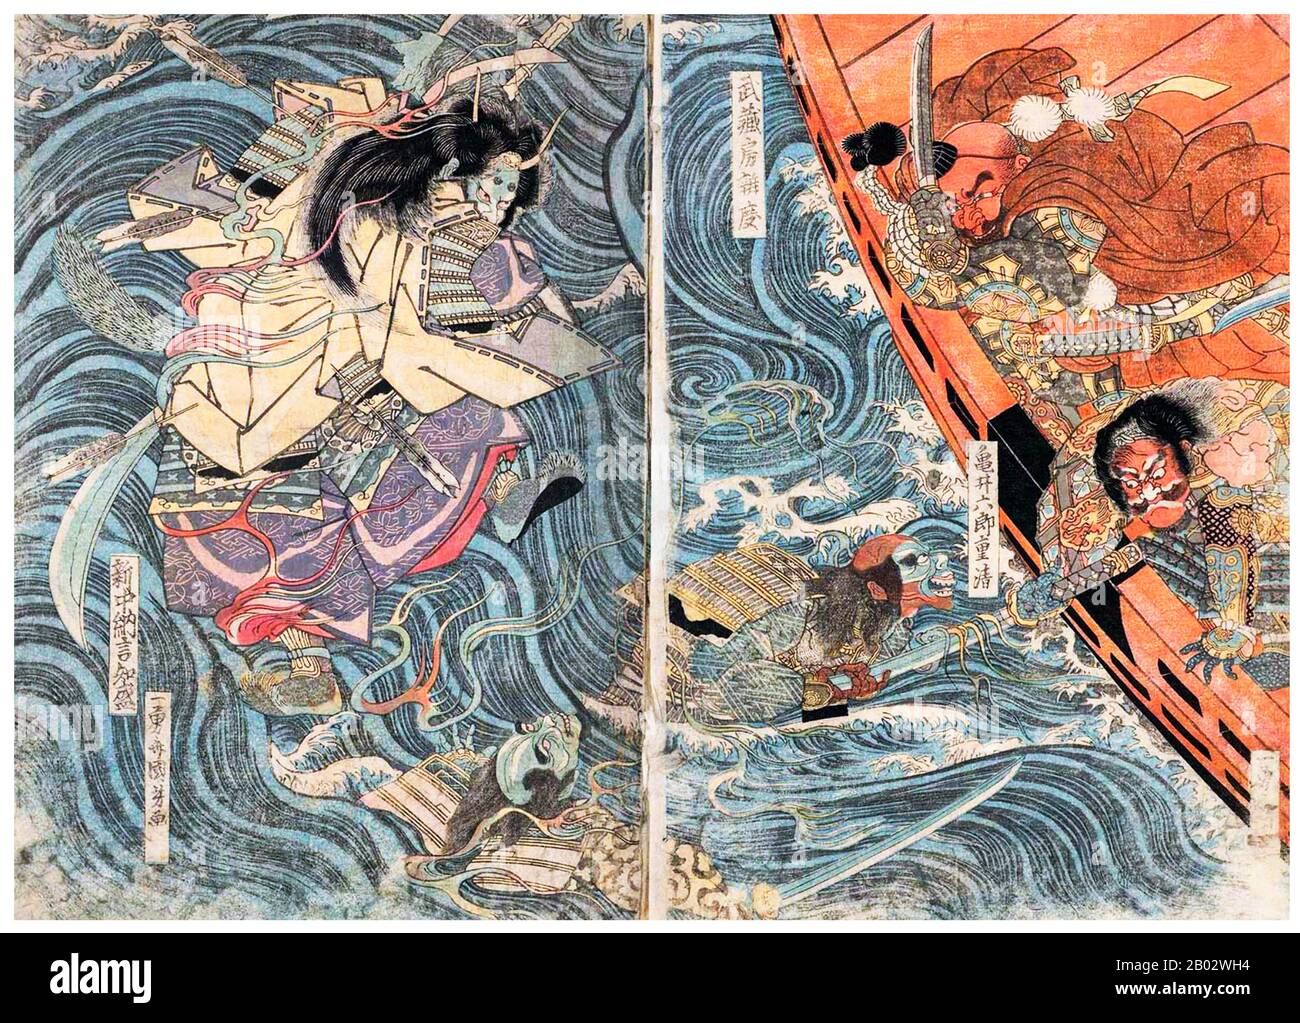 Utagawa Kuniyoshi (January 1, 1798 - April 14, 1861) was one of the last great masters of the Japanese ukiyo-e style of woodblock prints and painting. He is associated with the Utagawa school.  The range of Kuniyoshi's preferred subjects included many genres: landscapes, beautiful women, Kabuki actors, cats, and mythical animals. He is known for depictions of the battles of samurai and legendary heroes. His artwork was affected by Western influences in landscape painting and caricature. Stock Photo